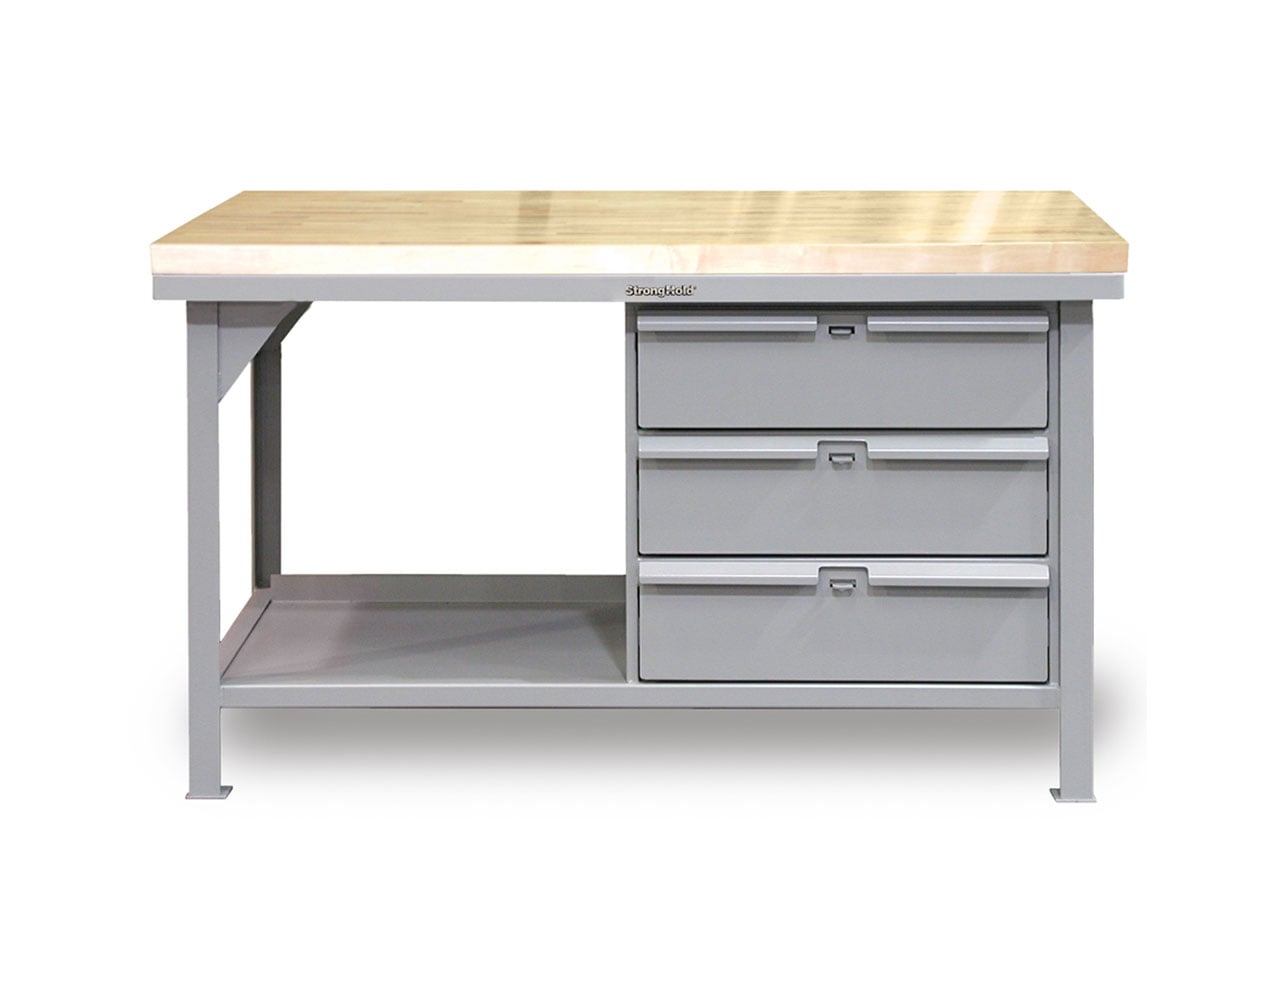 Extreme Duty 7 GA Shop Table with 1 3/4 in. Maple Top, 3 Drawers, 1 Shelf - 72 In. W x 36 In. D x 34 In. H